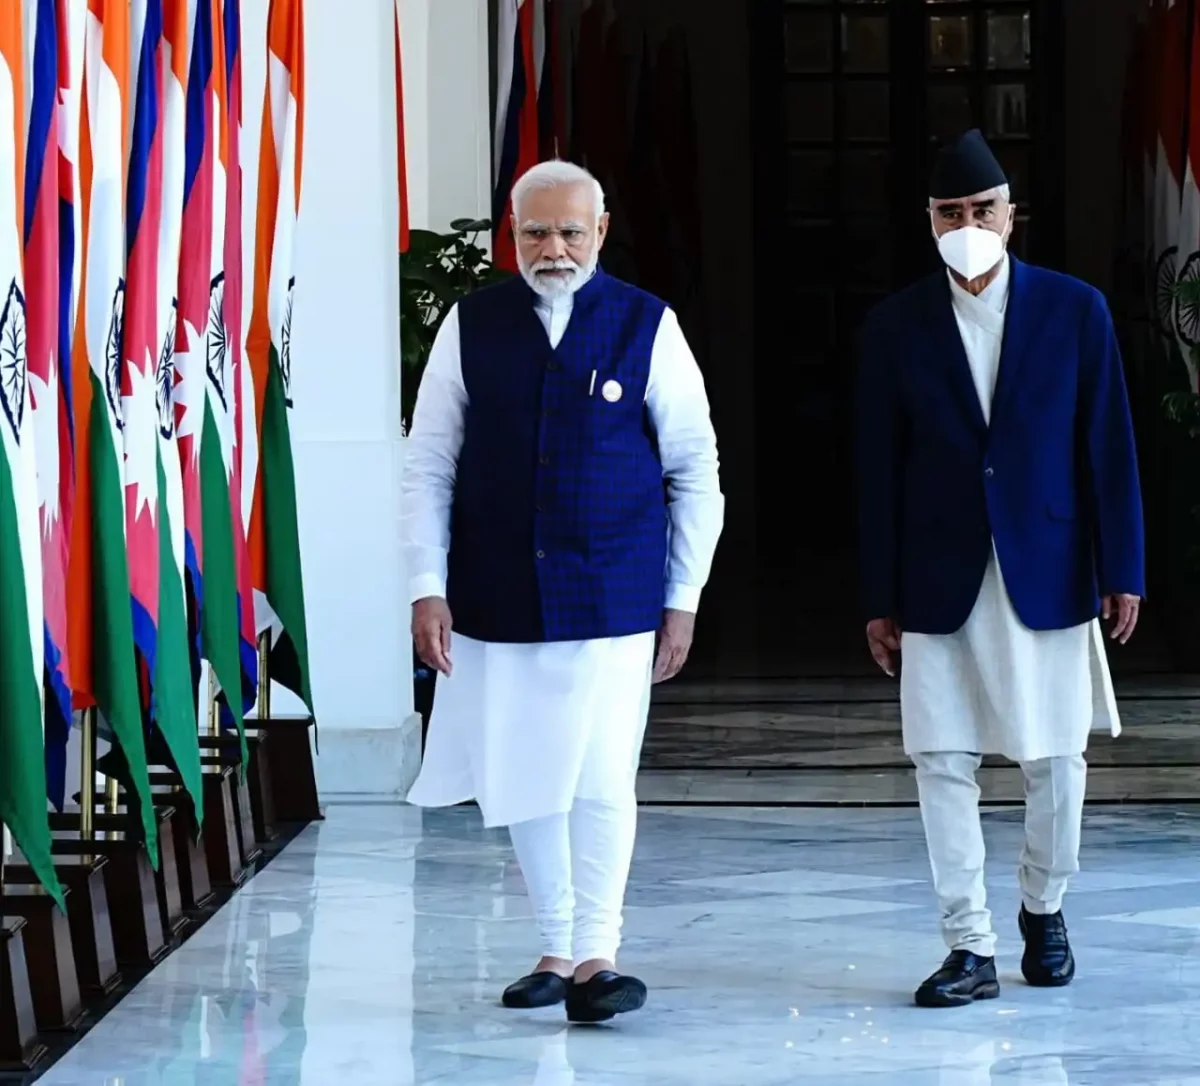 India’s ties with Nepal are unparalleled, says PM Modi